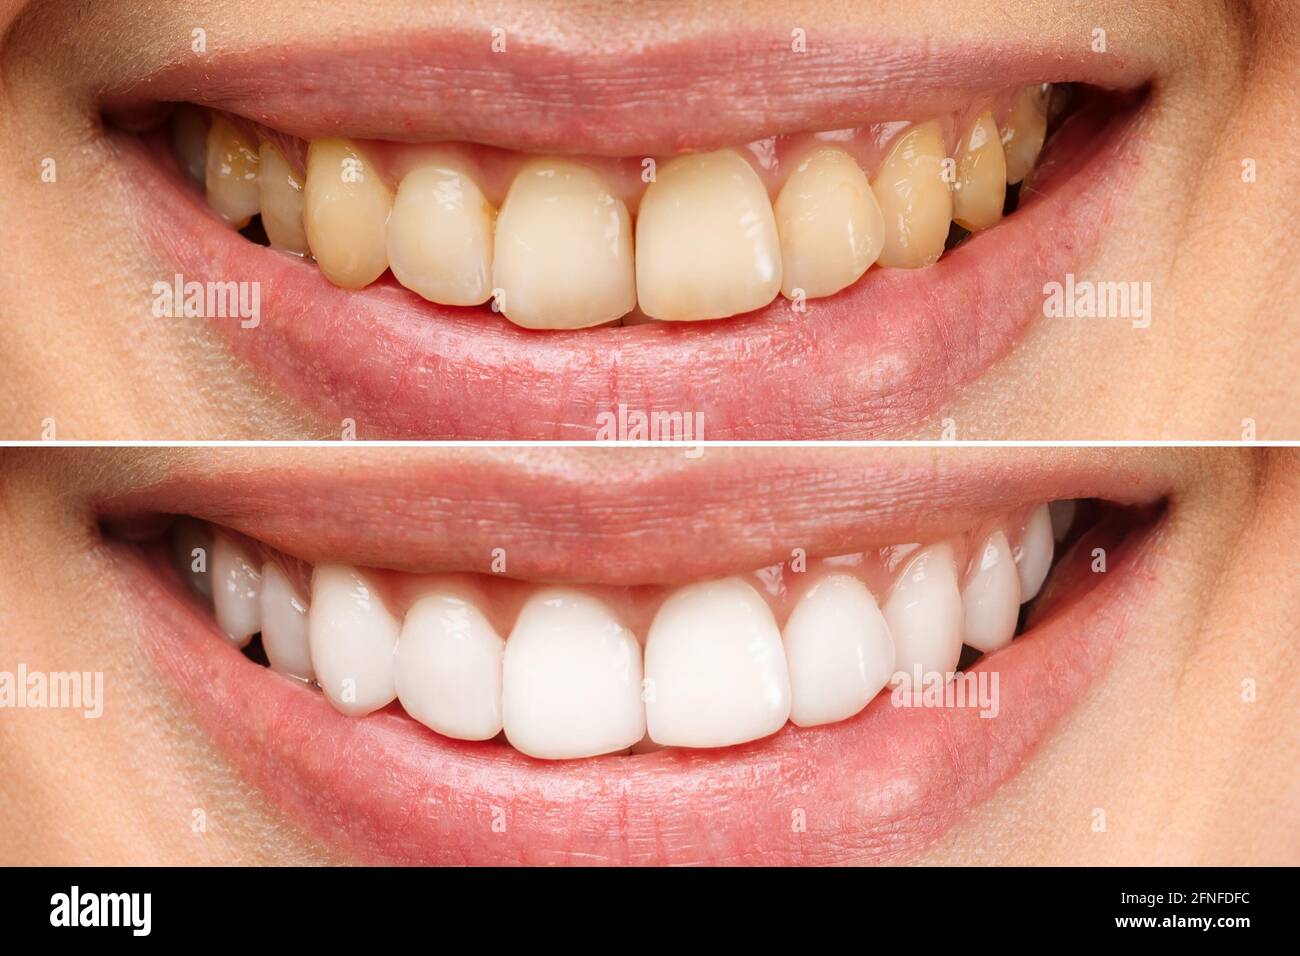 woman teeth before and after whitening. Over white background. Dental clinic patient. Image symbolizes oral care dentistry, stomatology. Stock Photo